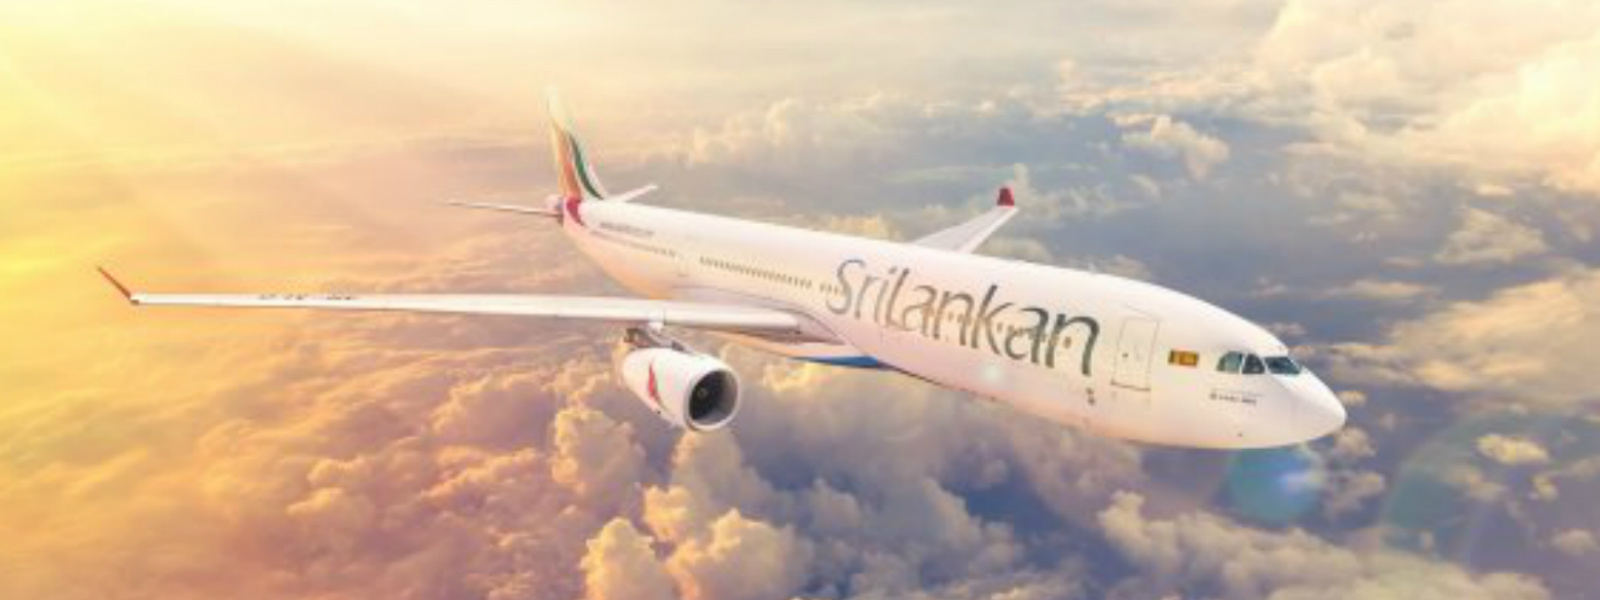 Policy recommendations for Sri Lankan airlines 